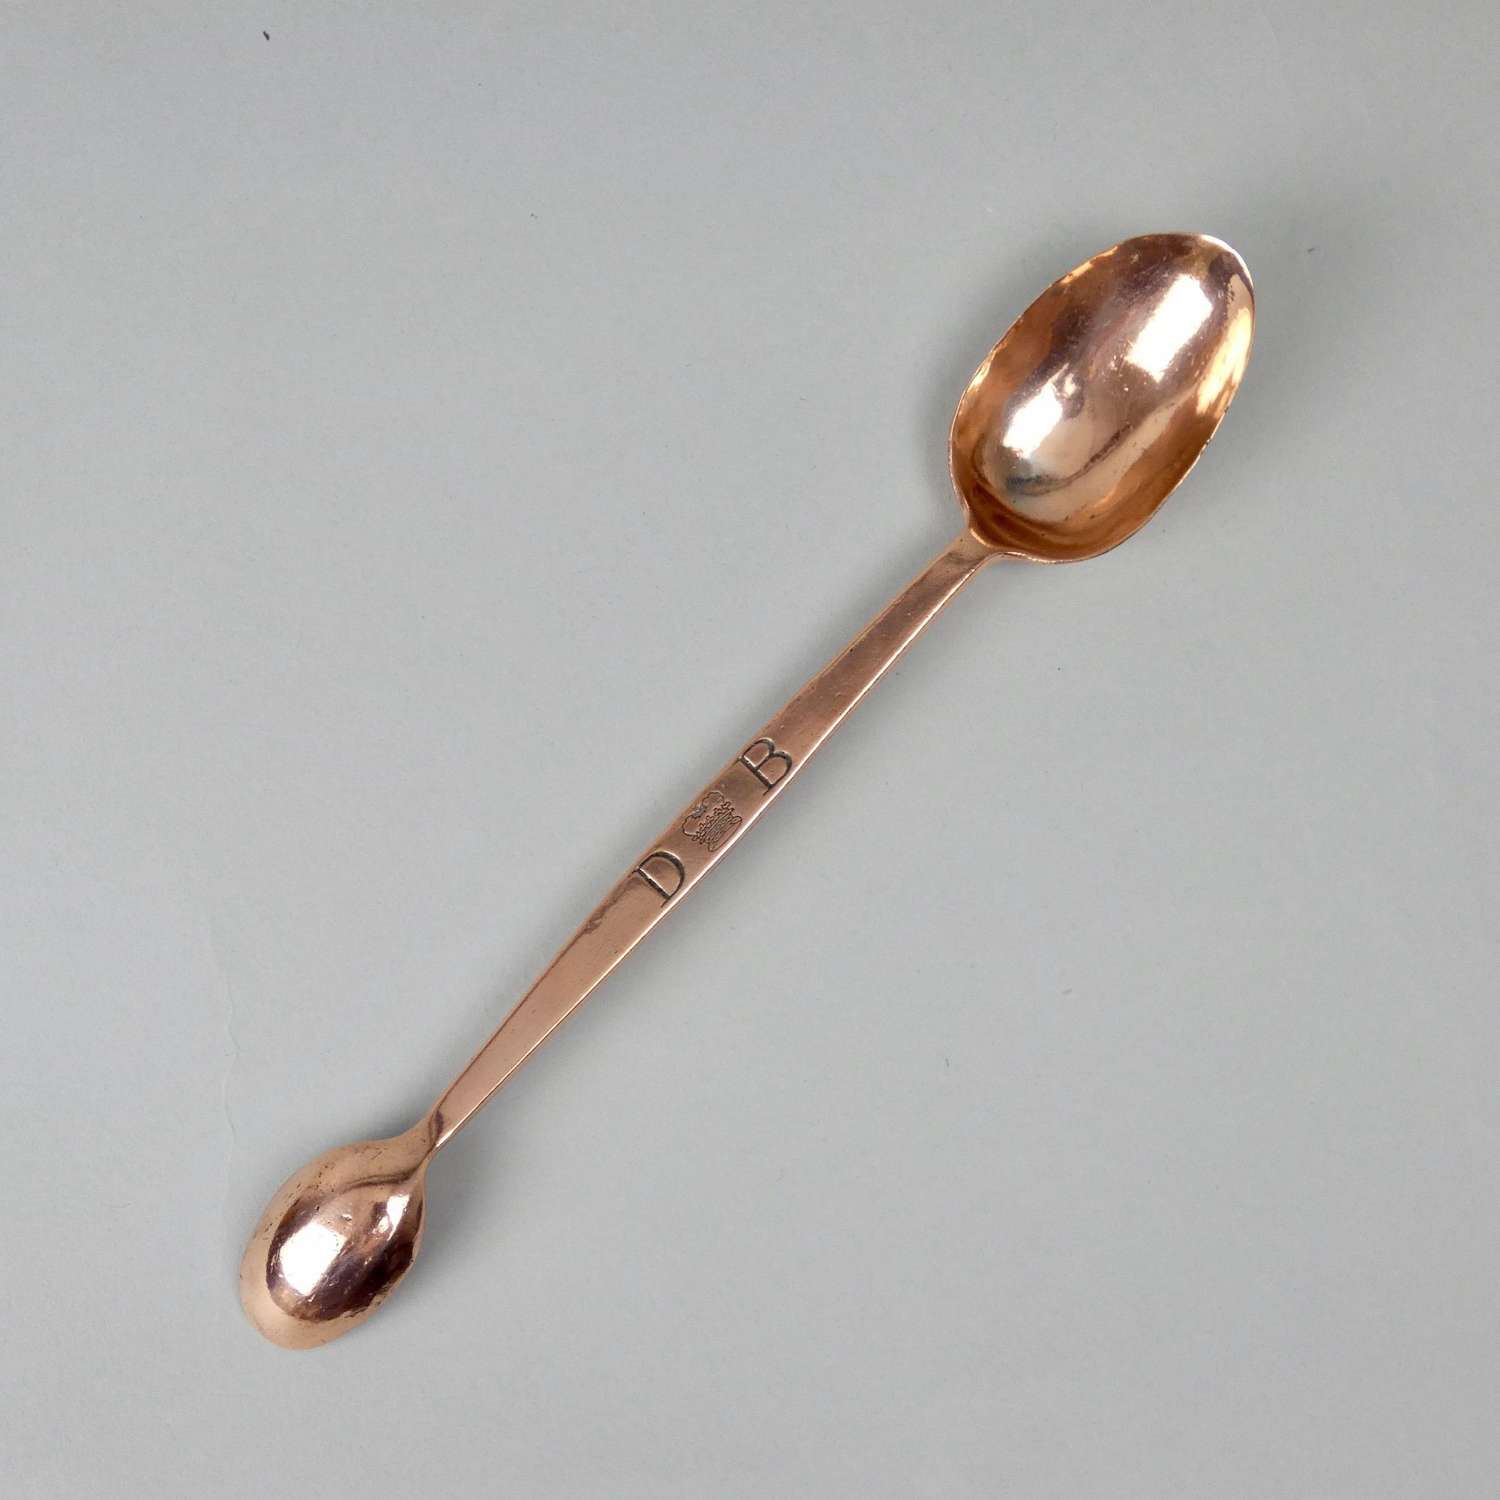 Double ended measuring spoon